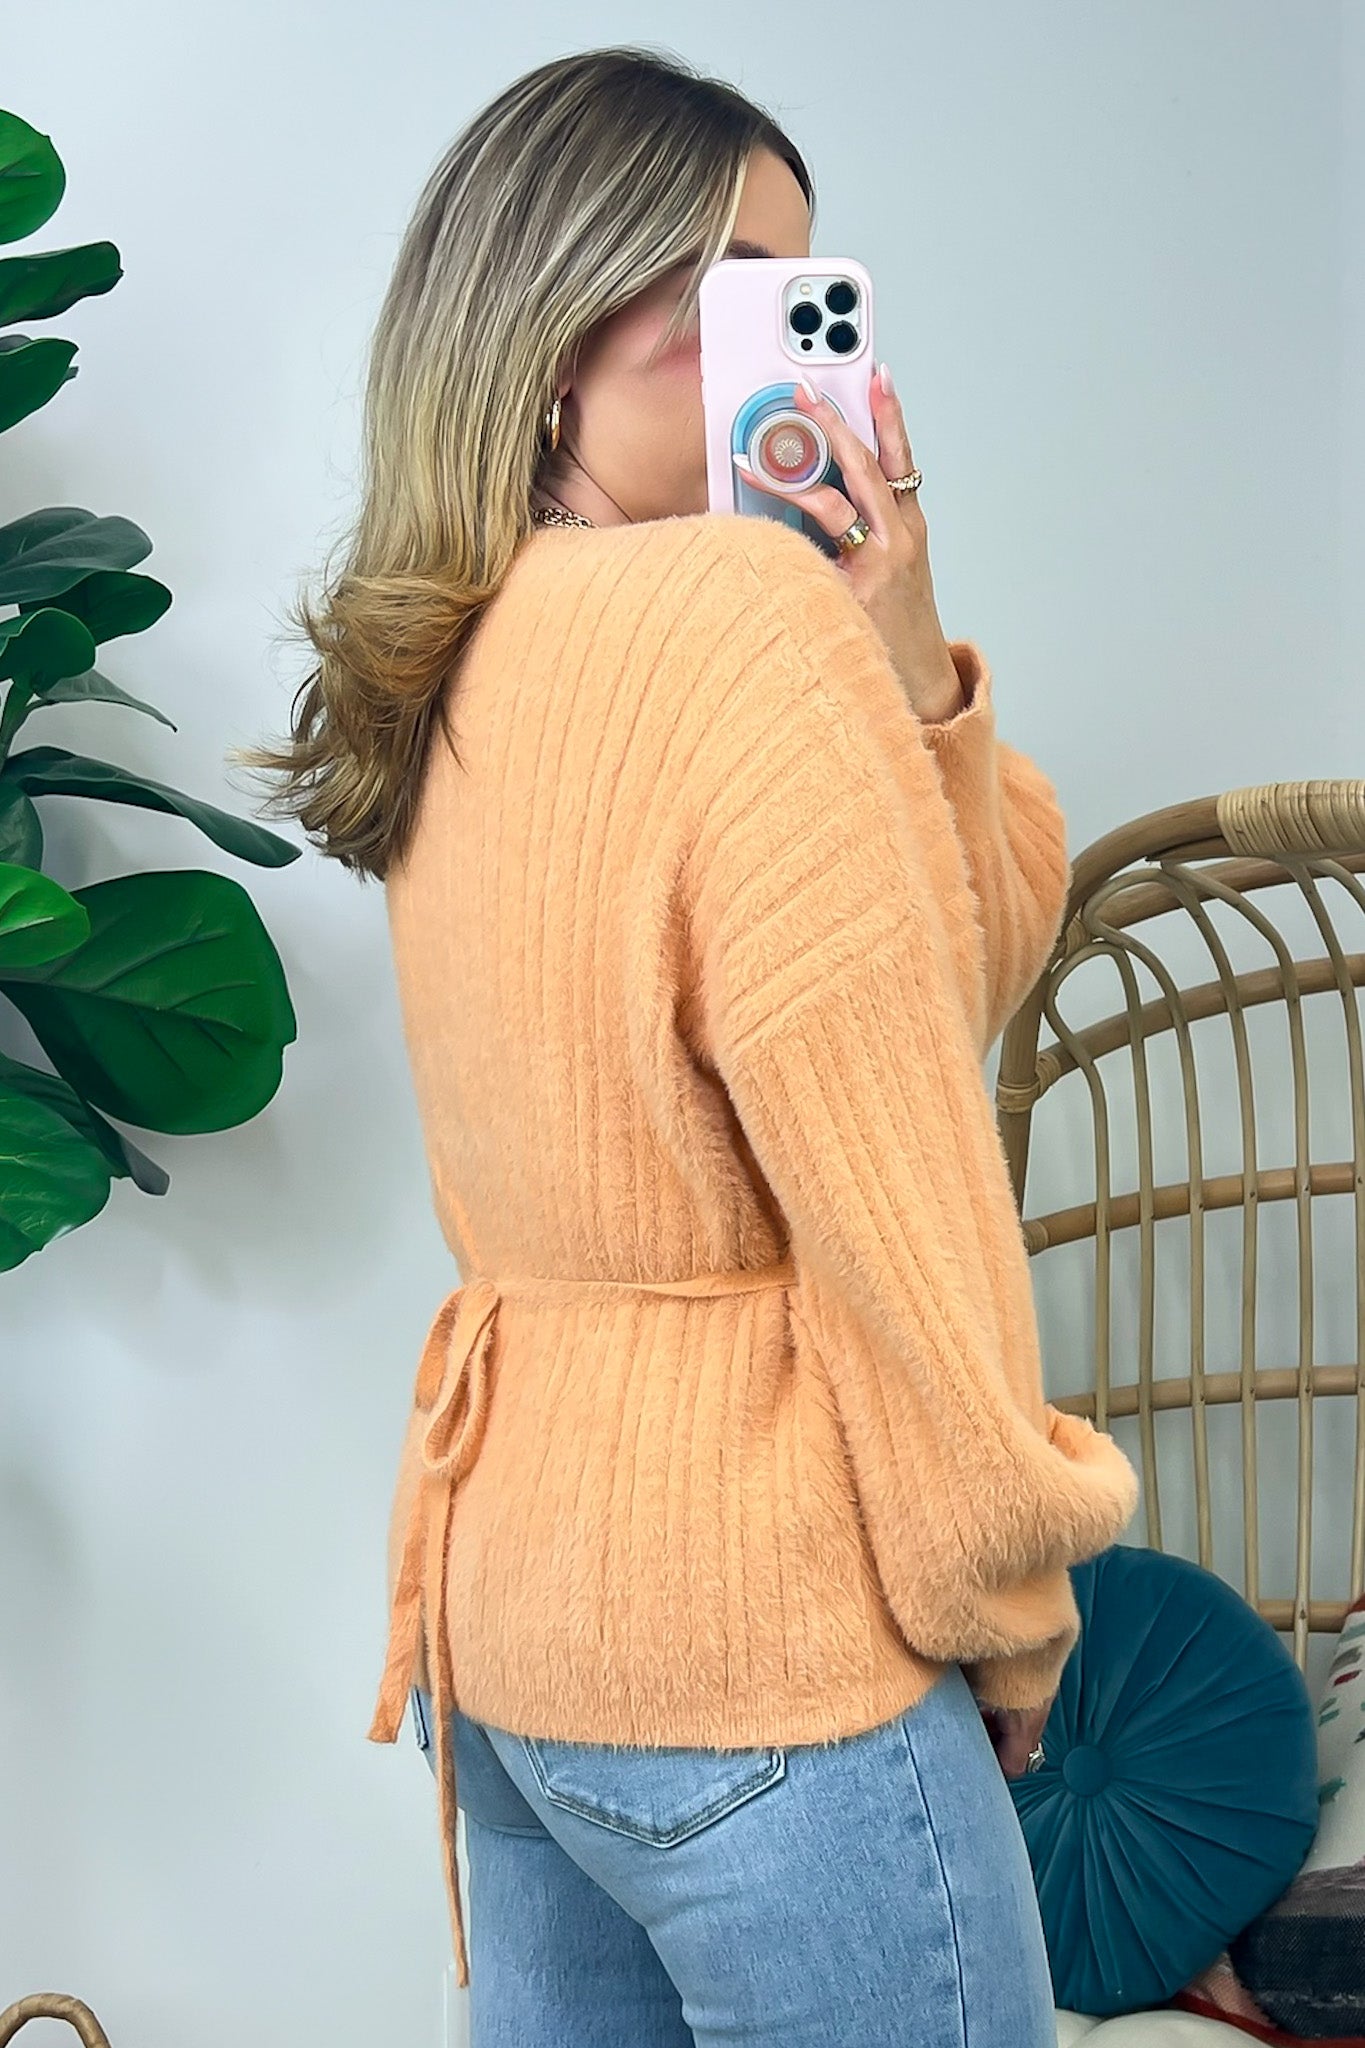  Coletti Ribbed Fuzzy Knit Wrap Sweater - Madison and Mallory